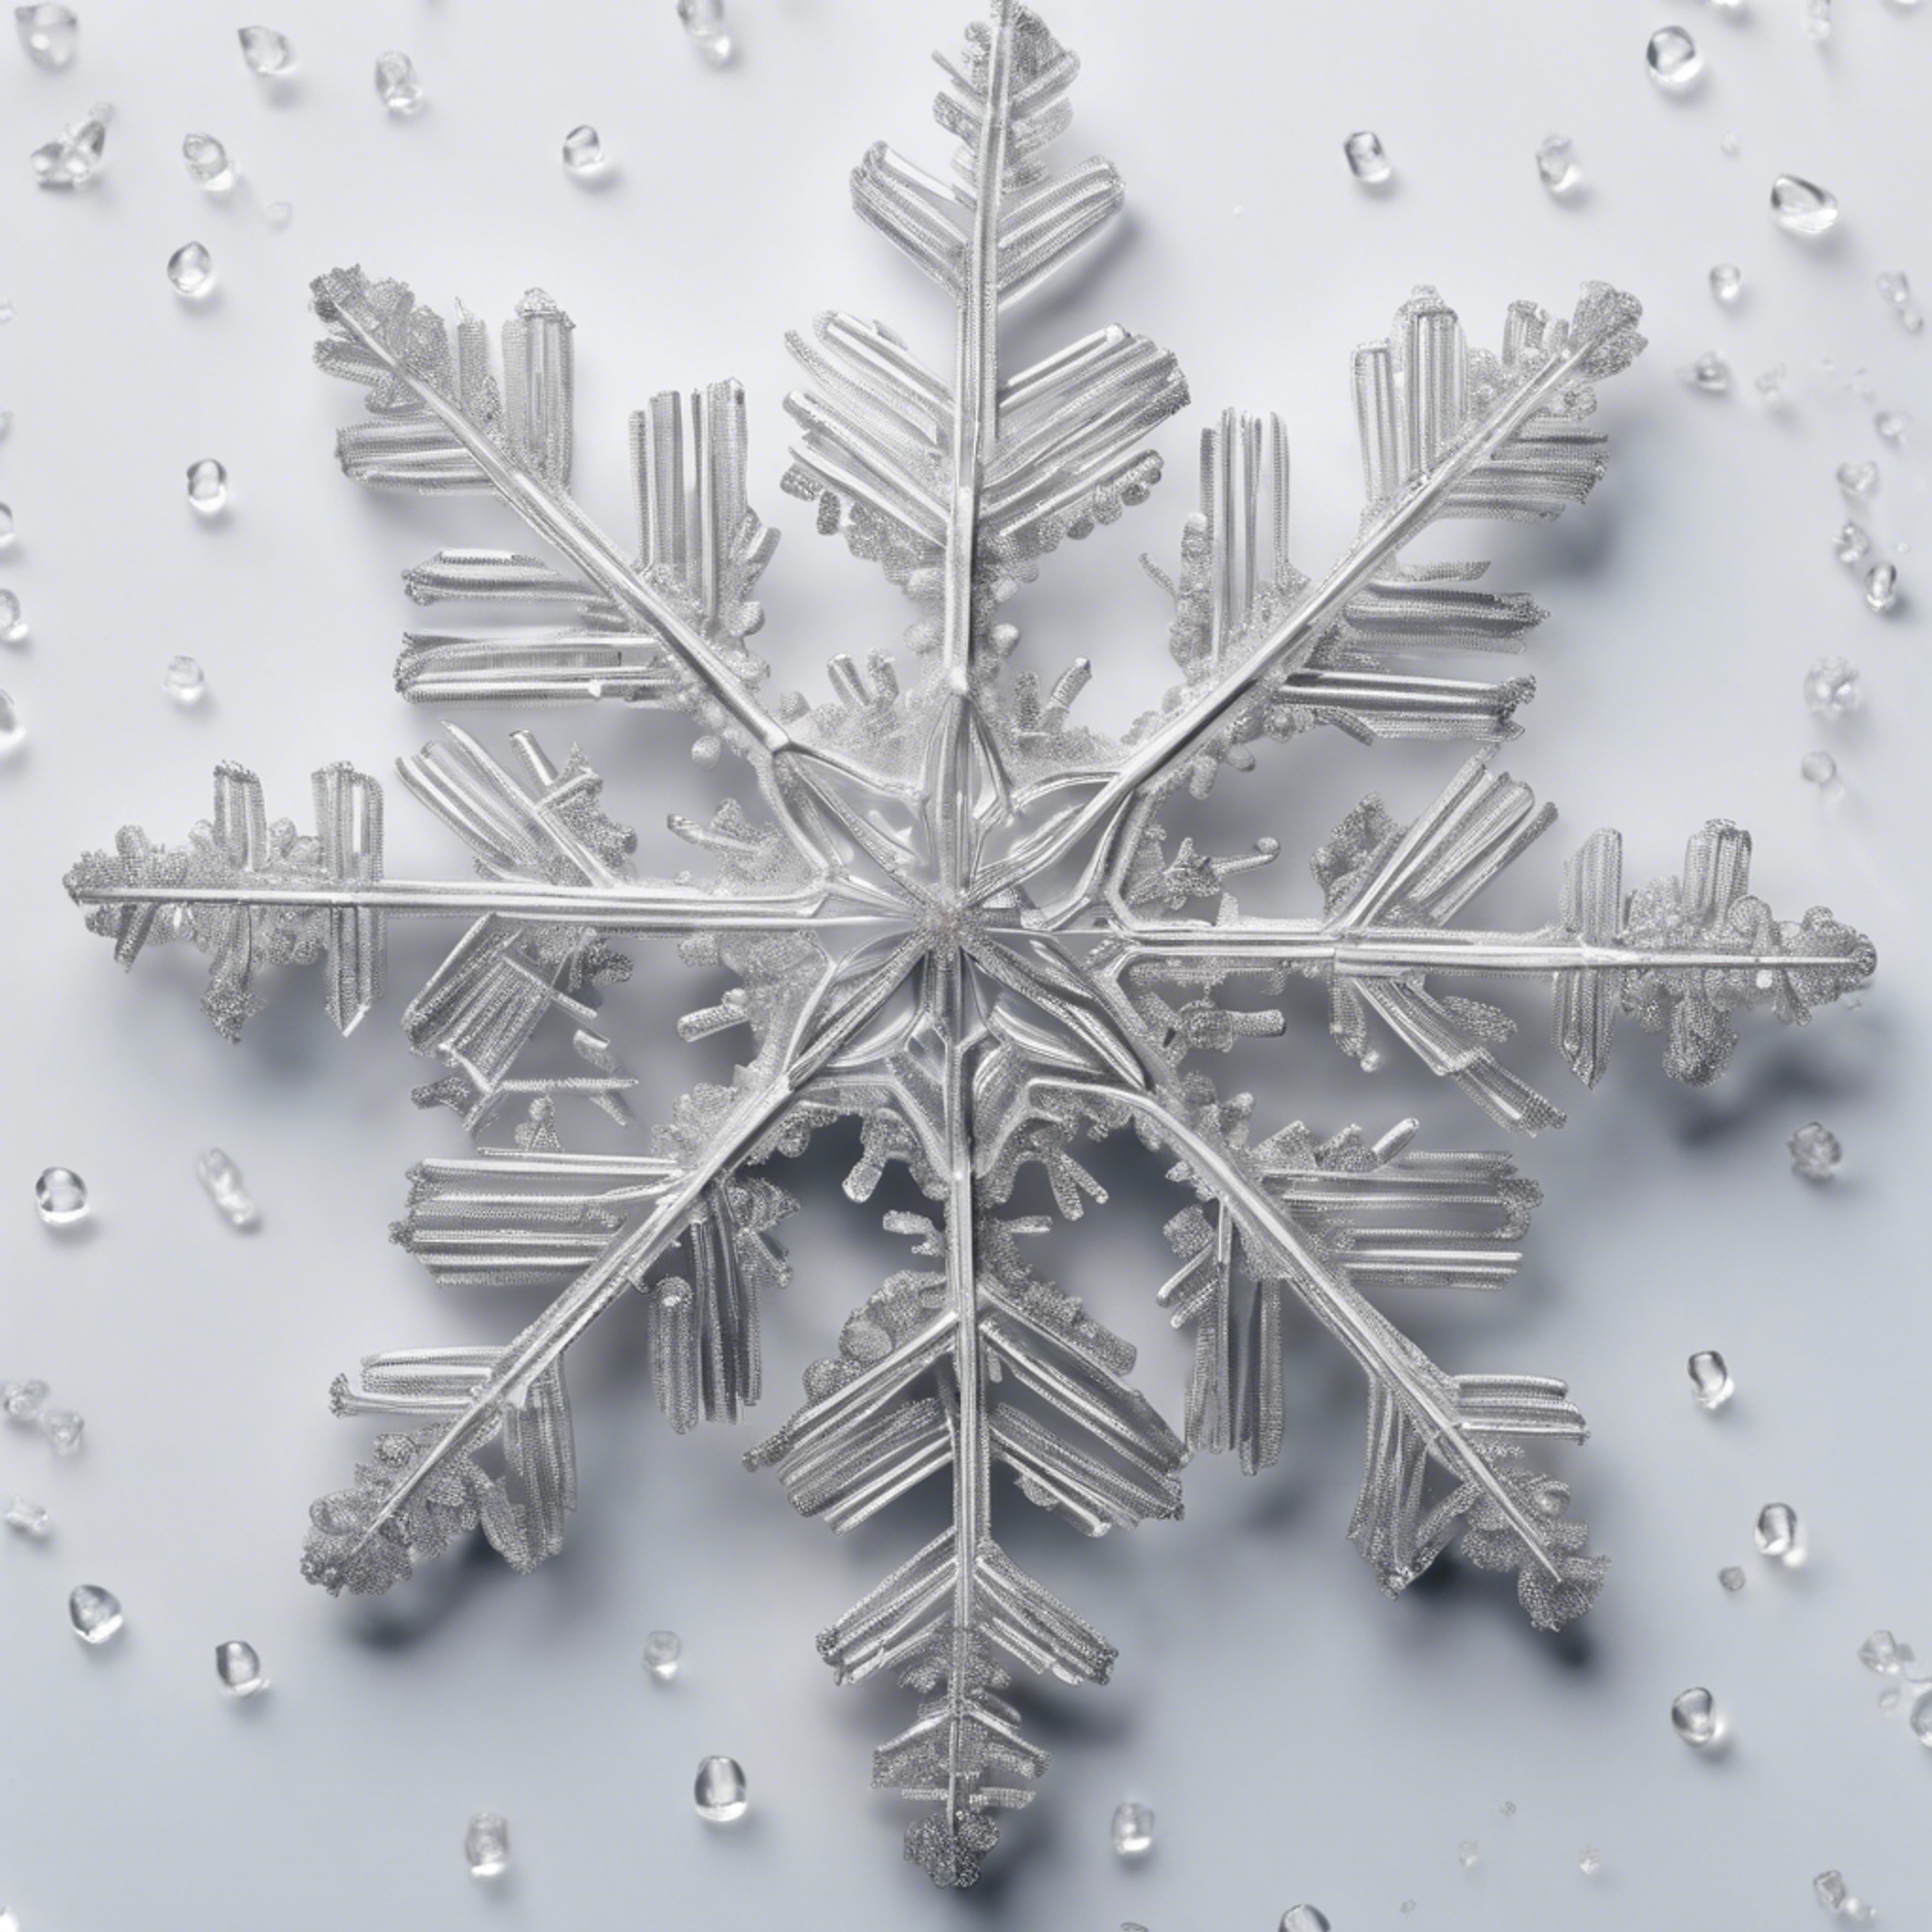 Close-up macro photography of a silver-white snowflake, intricate in detail, against a cool white background. Wallpaper[e4635791b5a244959ce4]